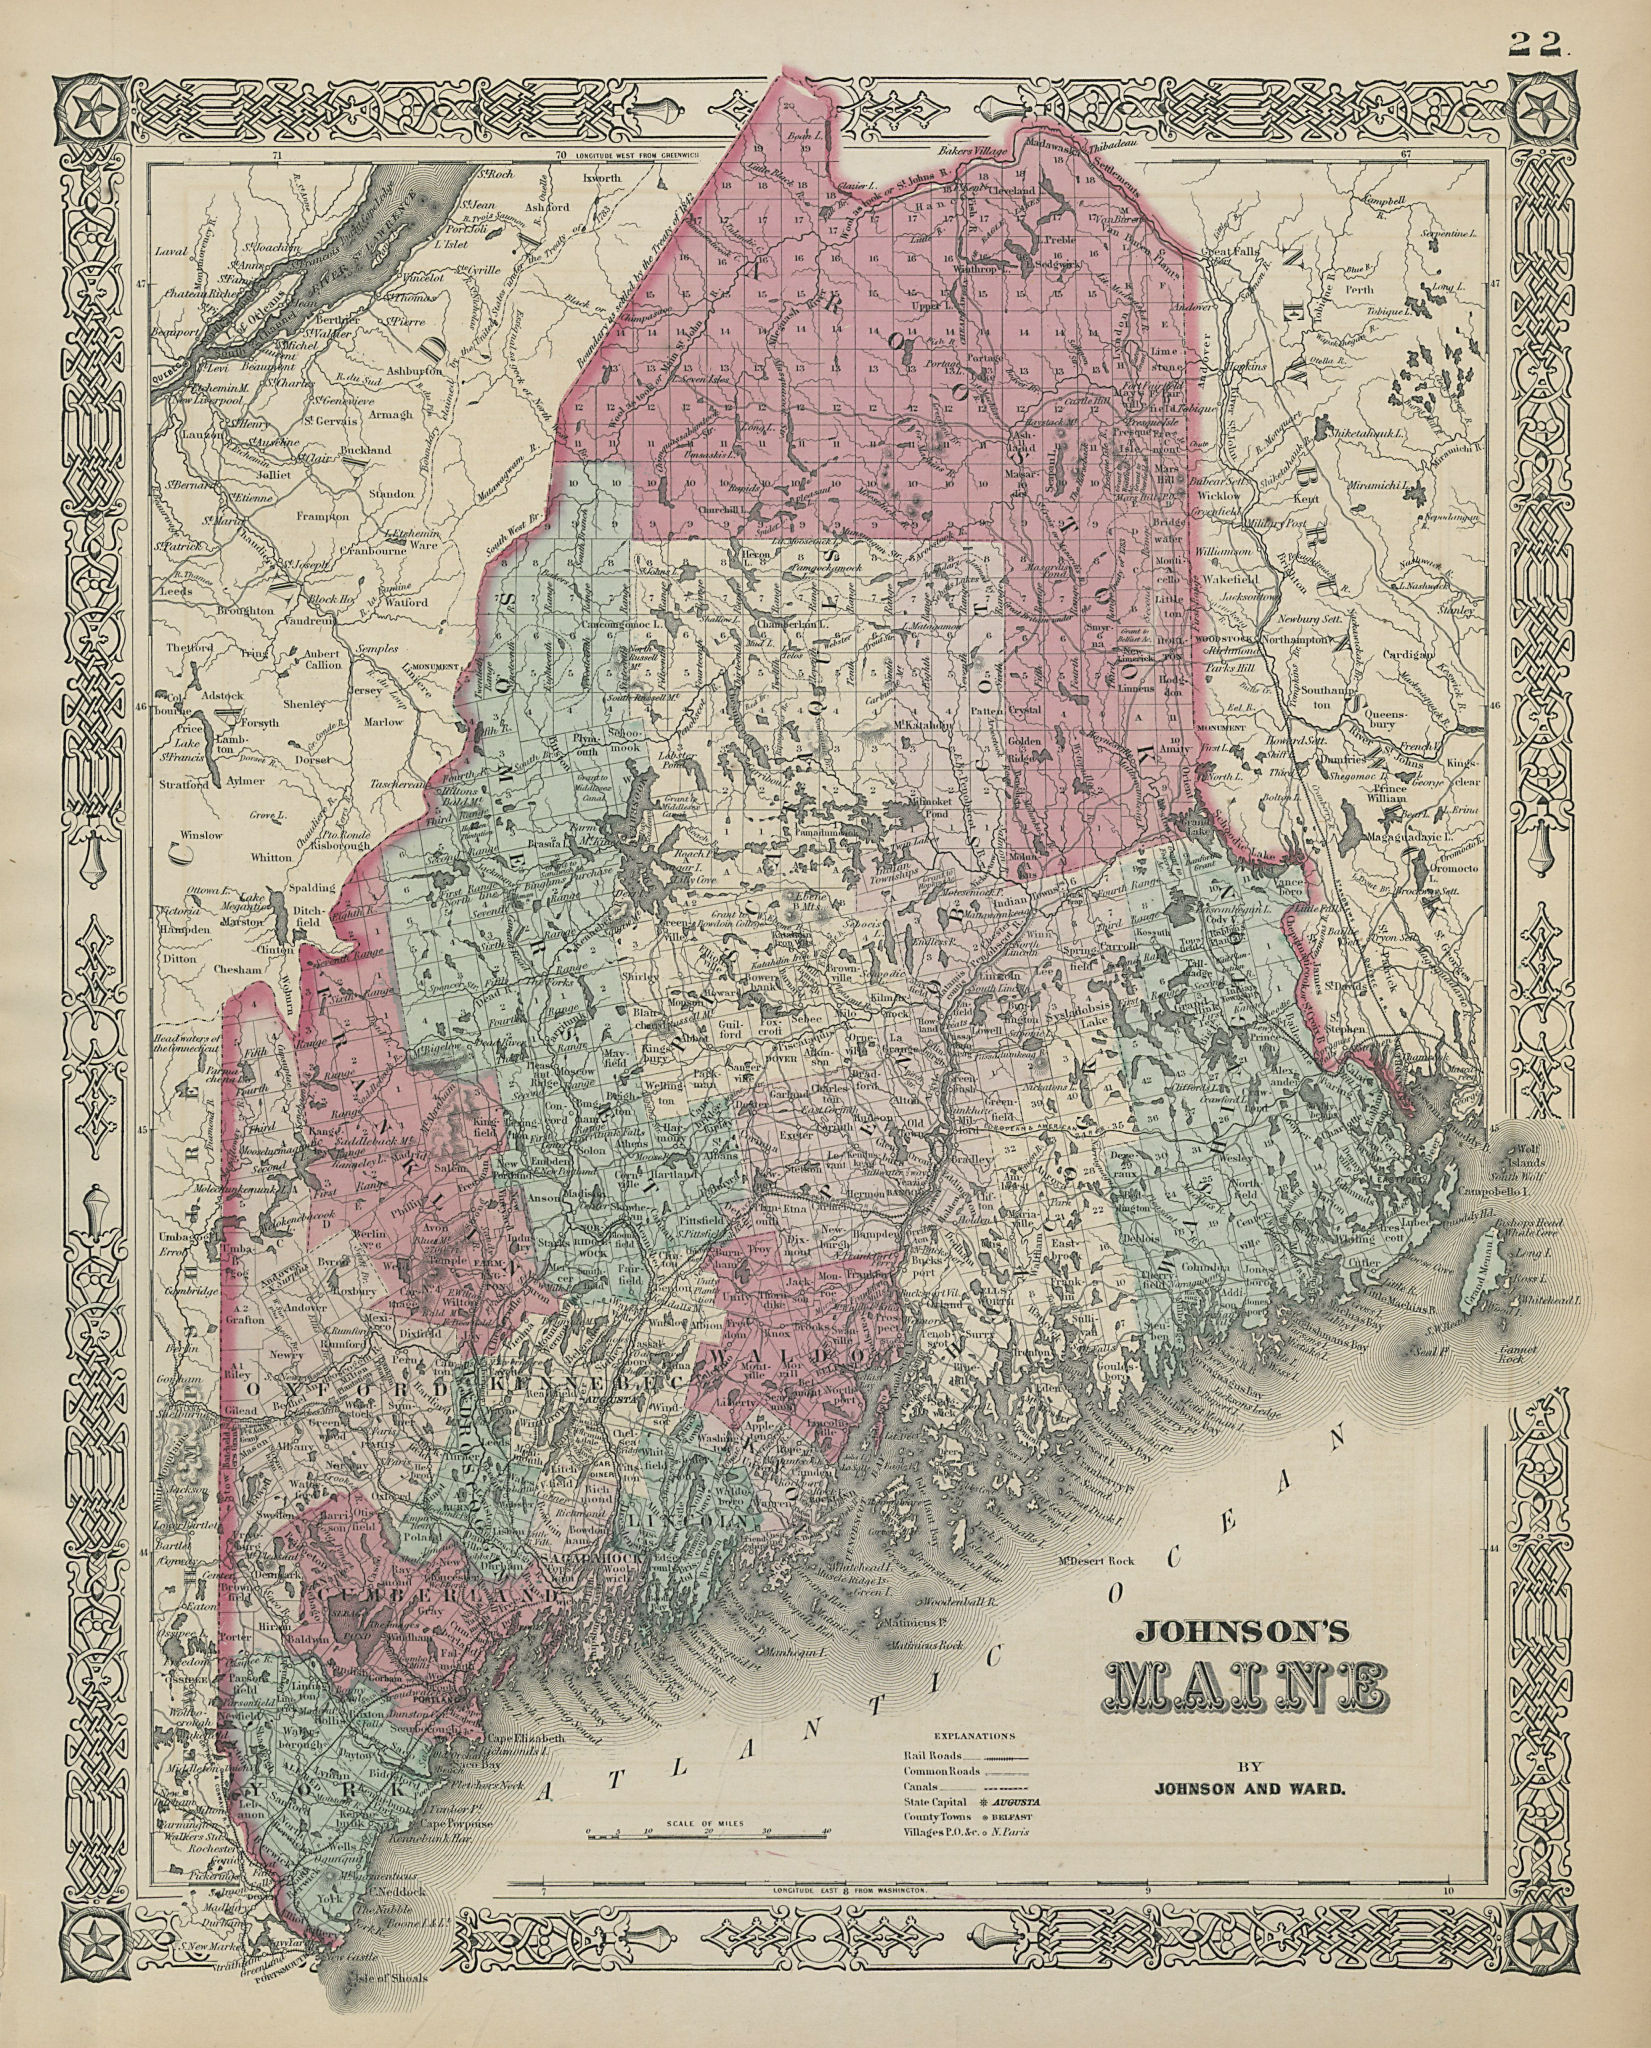 Associate Product Johnson's Maine. US State map showing counties 1865 old antique plan chart